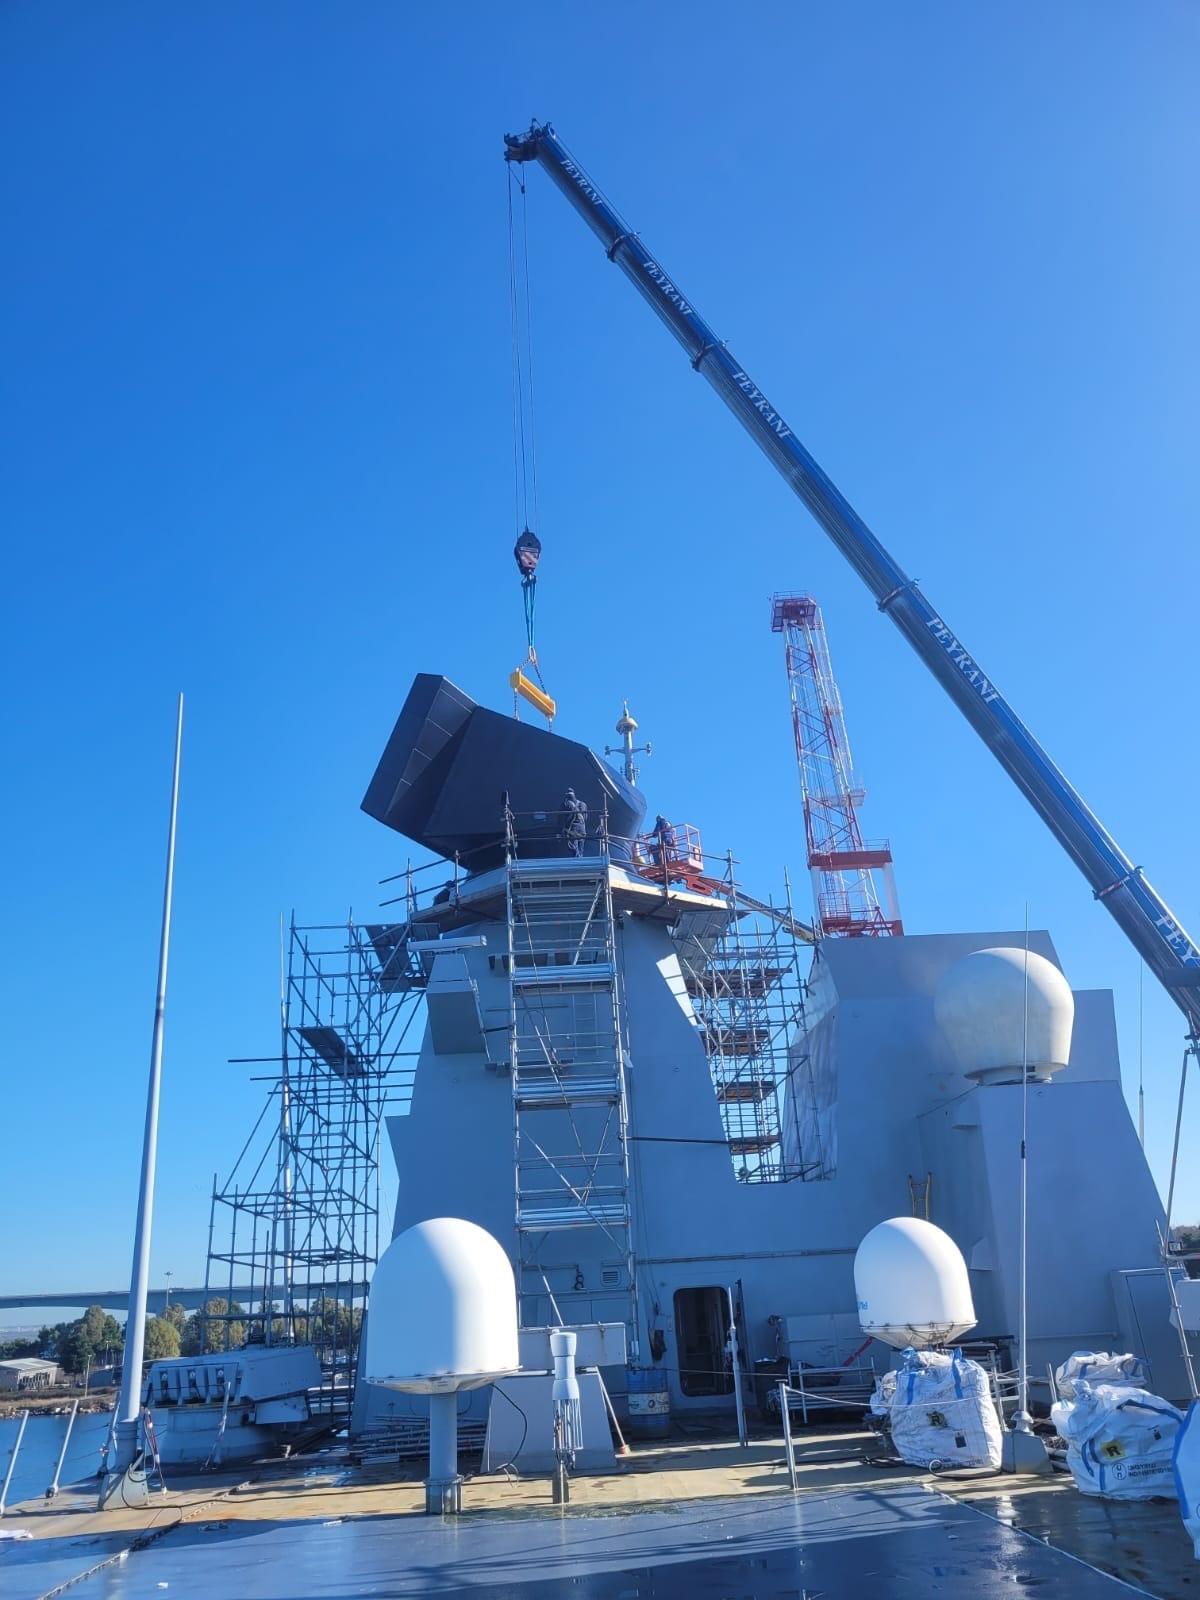 S1850M antenna reinstalled on Italian Navy ITS Destroyer Andrea Doria (D 553) after maintenance.
